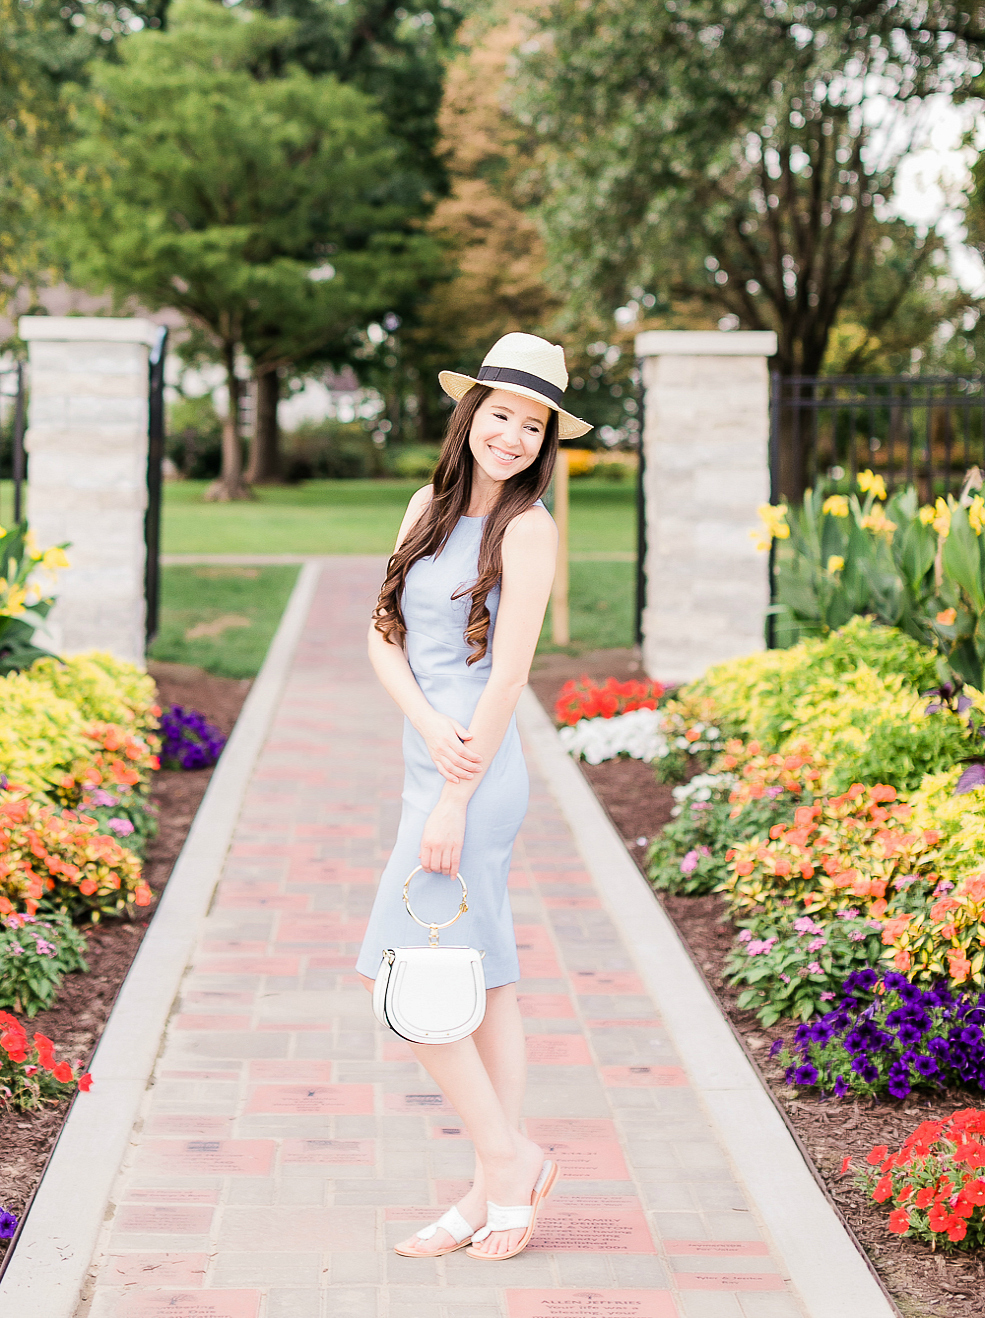 How to wear a sheath dress on vacation, Banana Republic paneled sheath dress, Banana Republic Packable Raffia Hat, Go with the Flow: How to Wear Your Work Clothes on Vacation by affordable style blogger Stephanie Ziajka from Diary of a Debutante